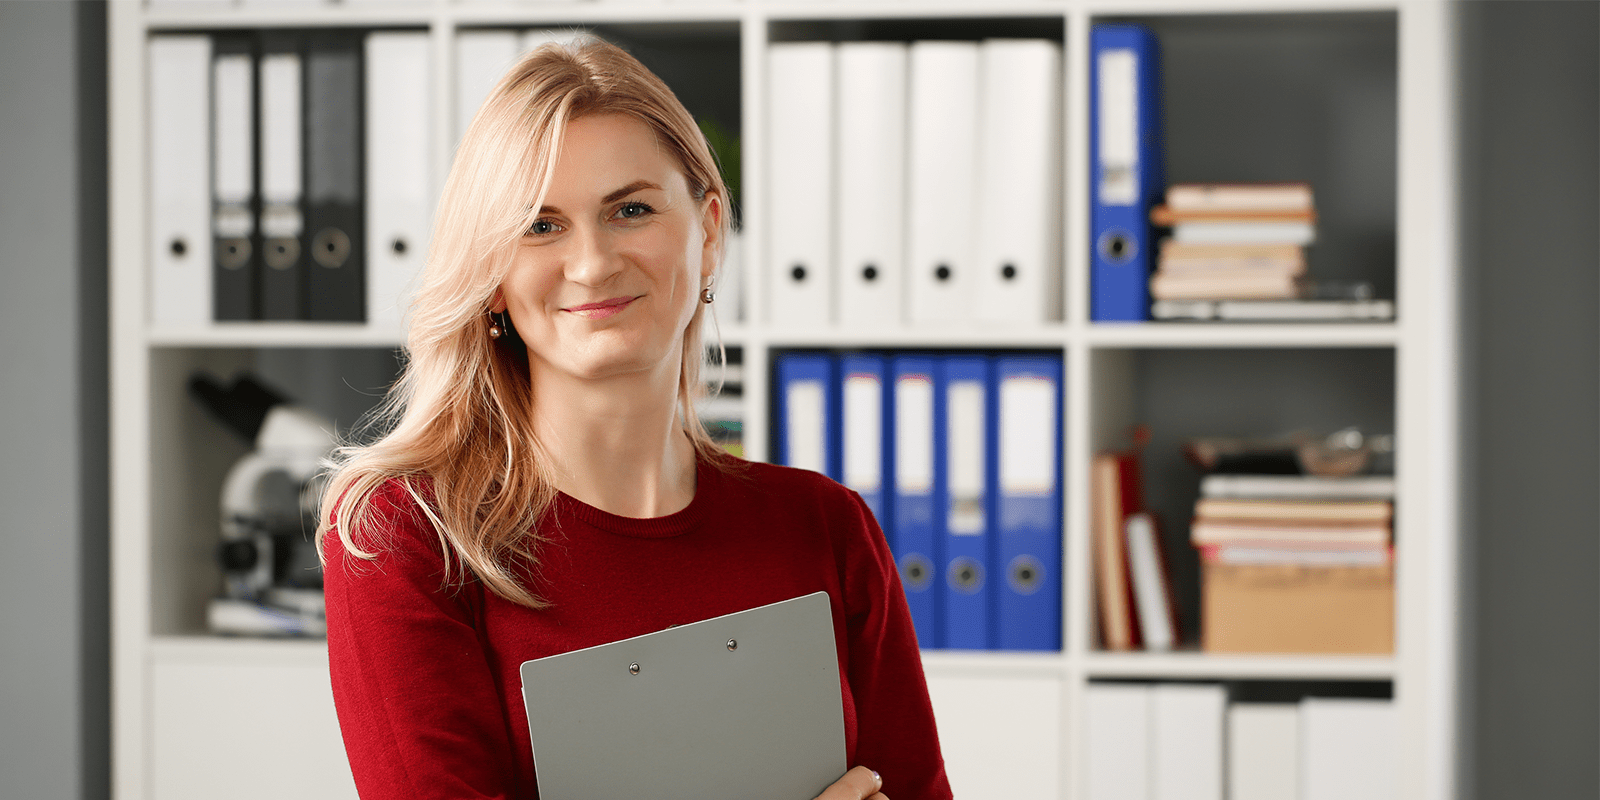 blonde woman in red shirt in front of shelf of binders